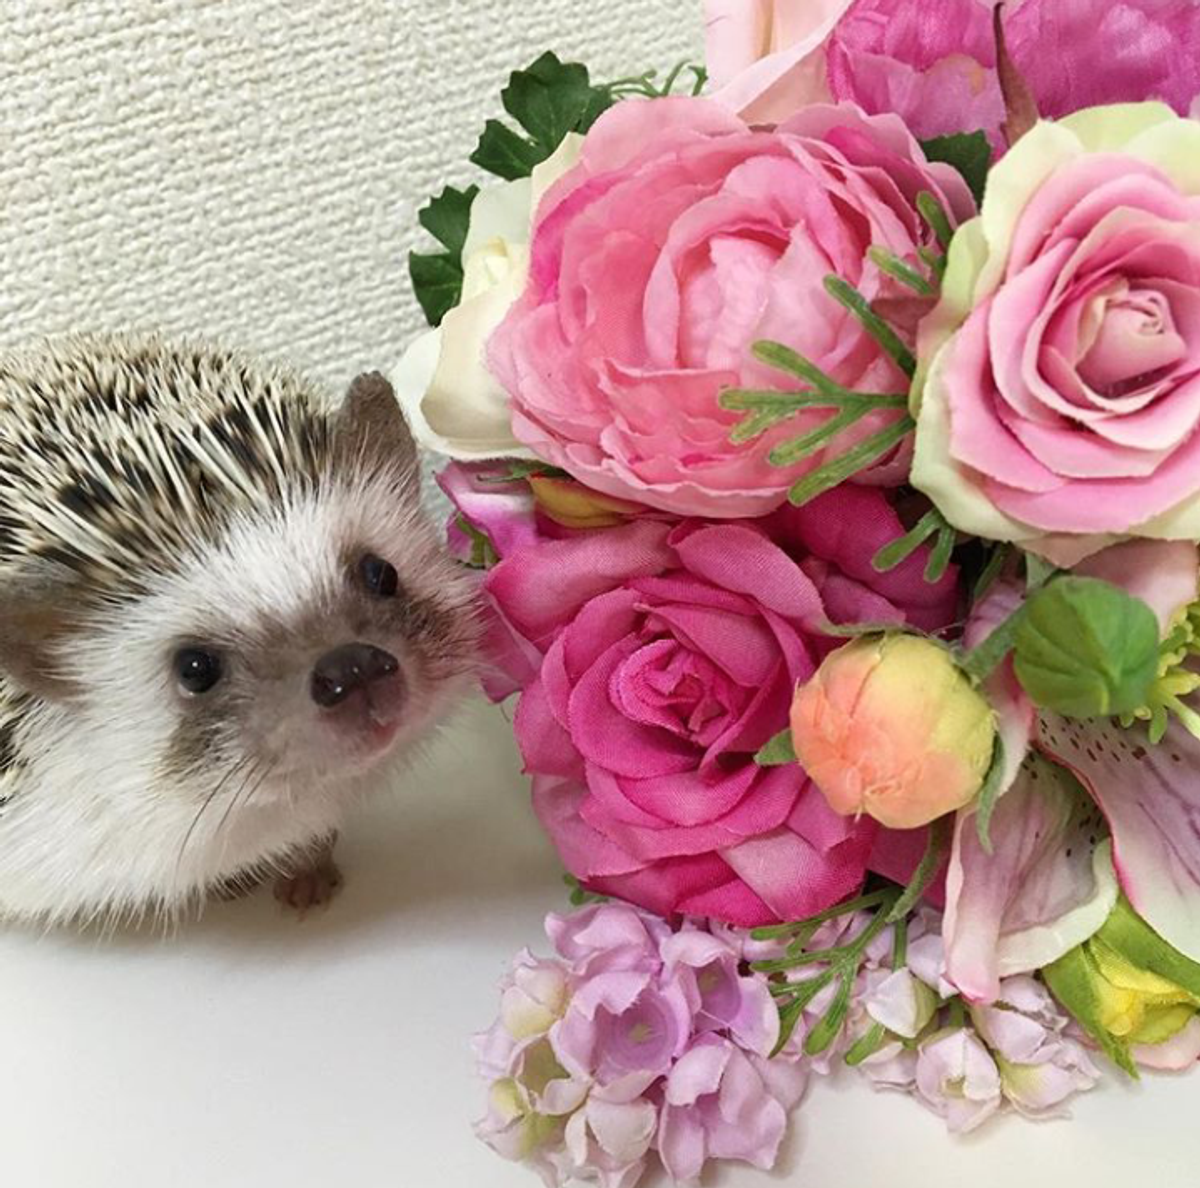 22 Adorable Hedgehogs To Follow On Instagram